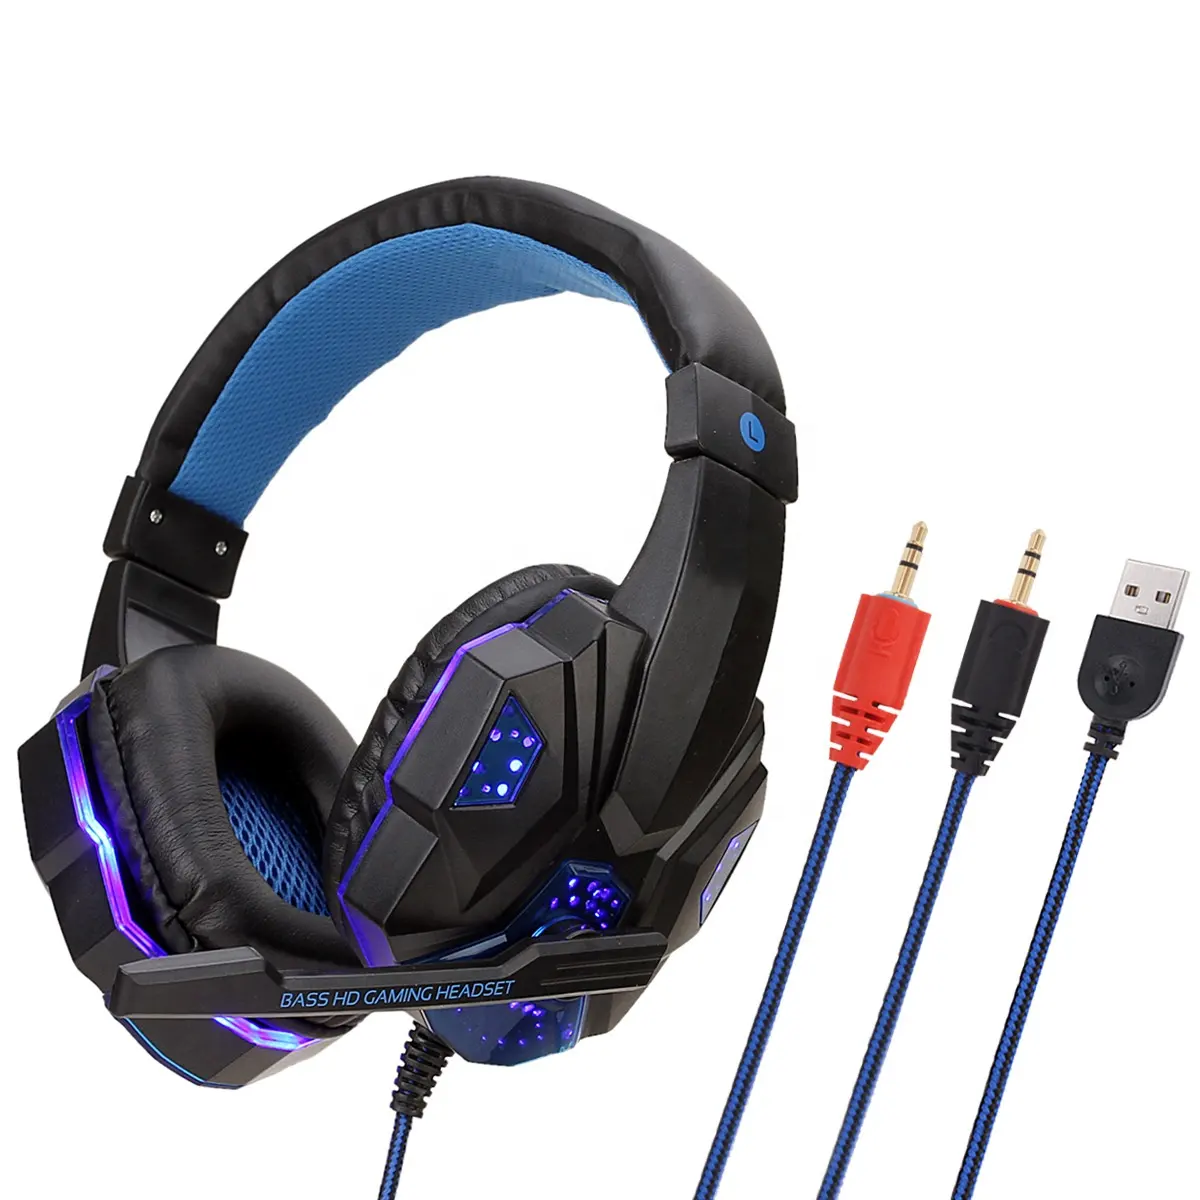 eBay Best Selling Electronic Product Noise cancelling gaming headset surround sound gaming headphone for Laptop and Desktop